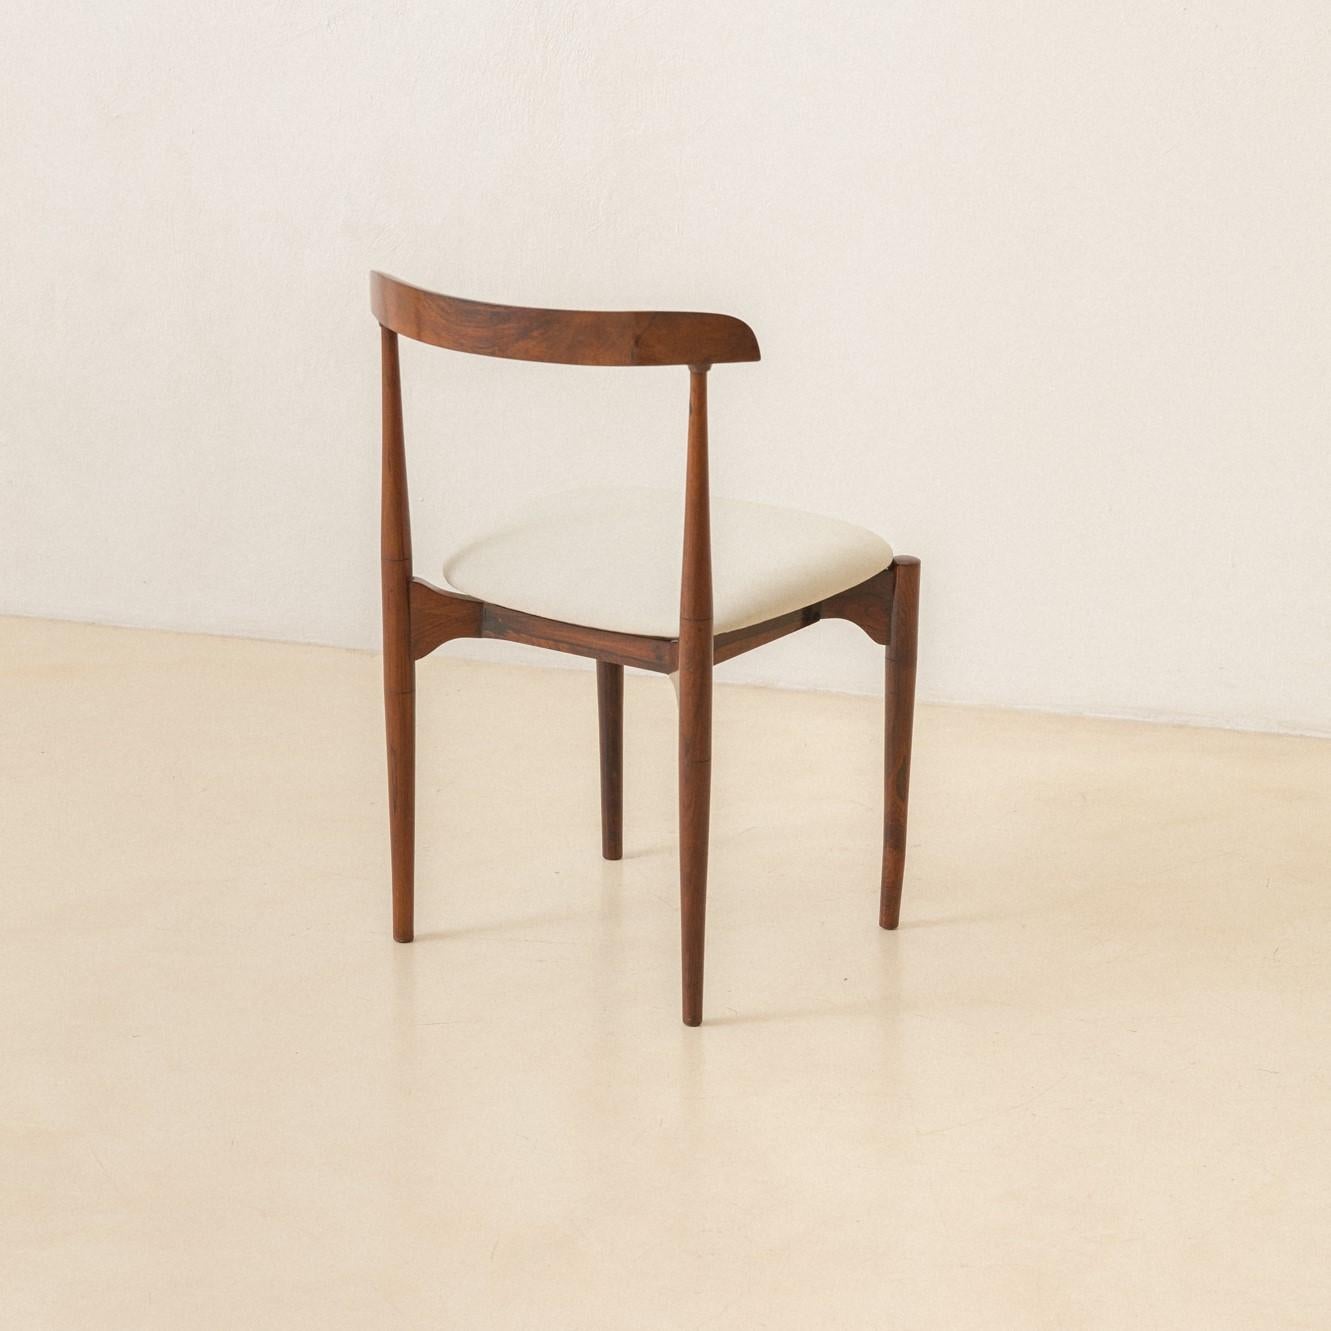 Rosewood Chair, Carlo Fongaro, 1950s, Rosewood, Brazilian Midcentury Design In Good Condition For Sale In New York, NY